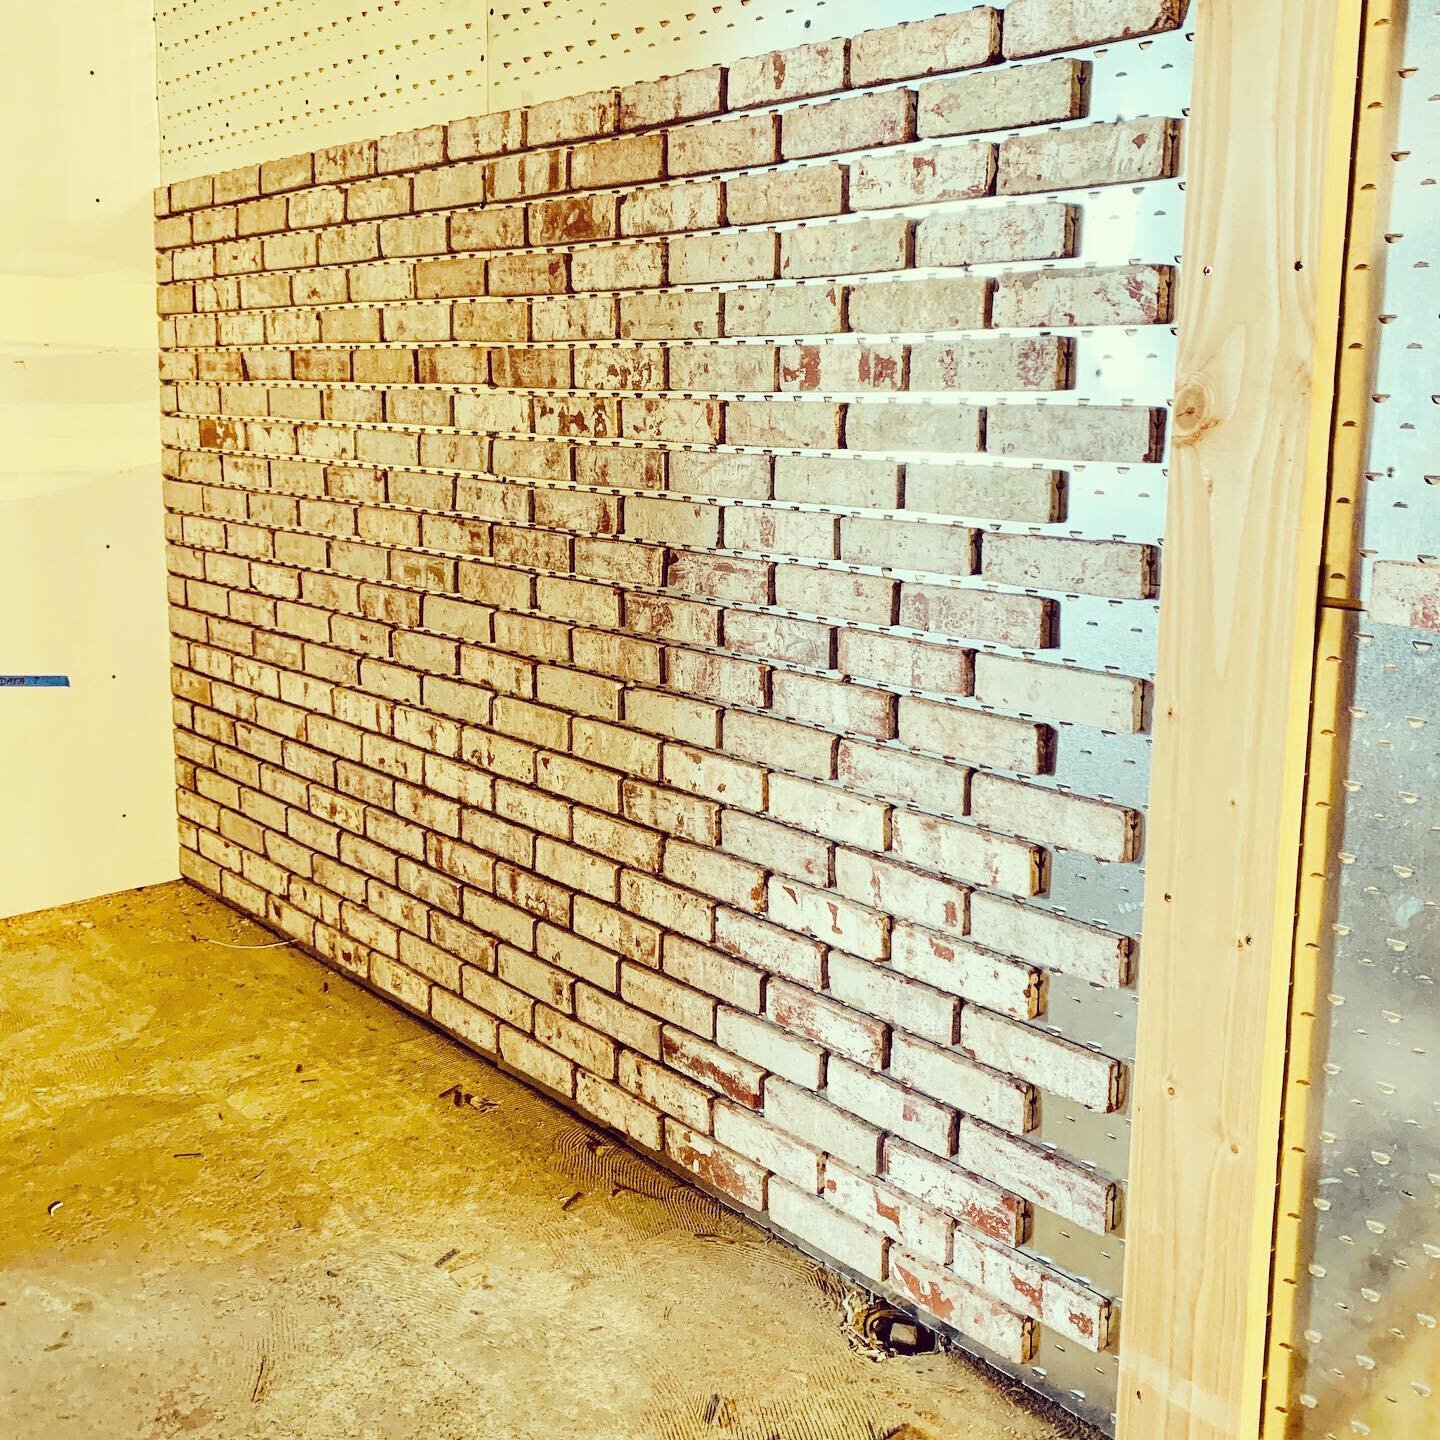 Create a brick wall, they said. Where no brick wall existed...

Getting creative with our masonry work using the McNear BrickFast. 

#westpointdevelopment #design #build #commercialdesign